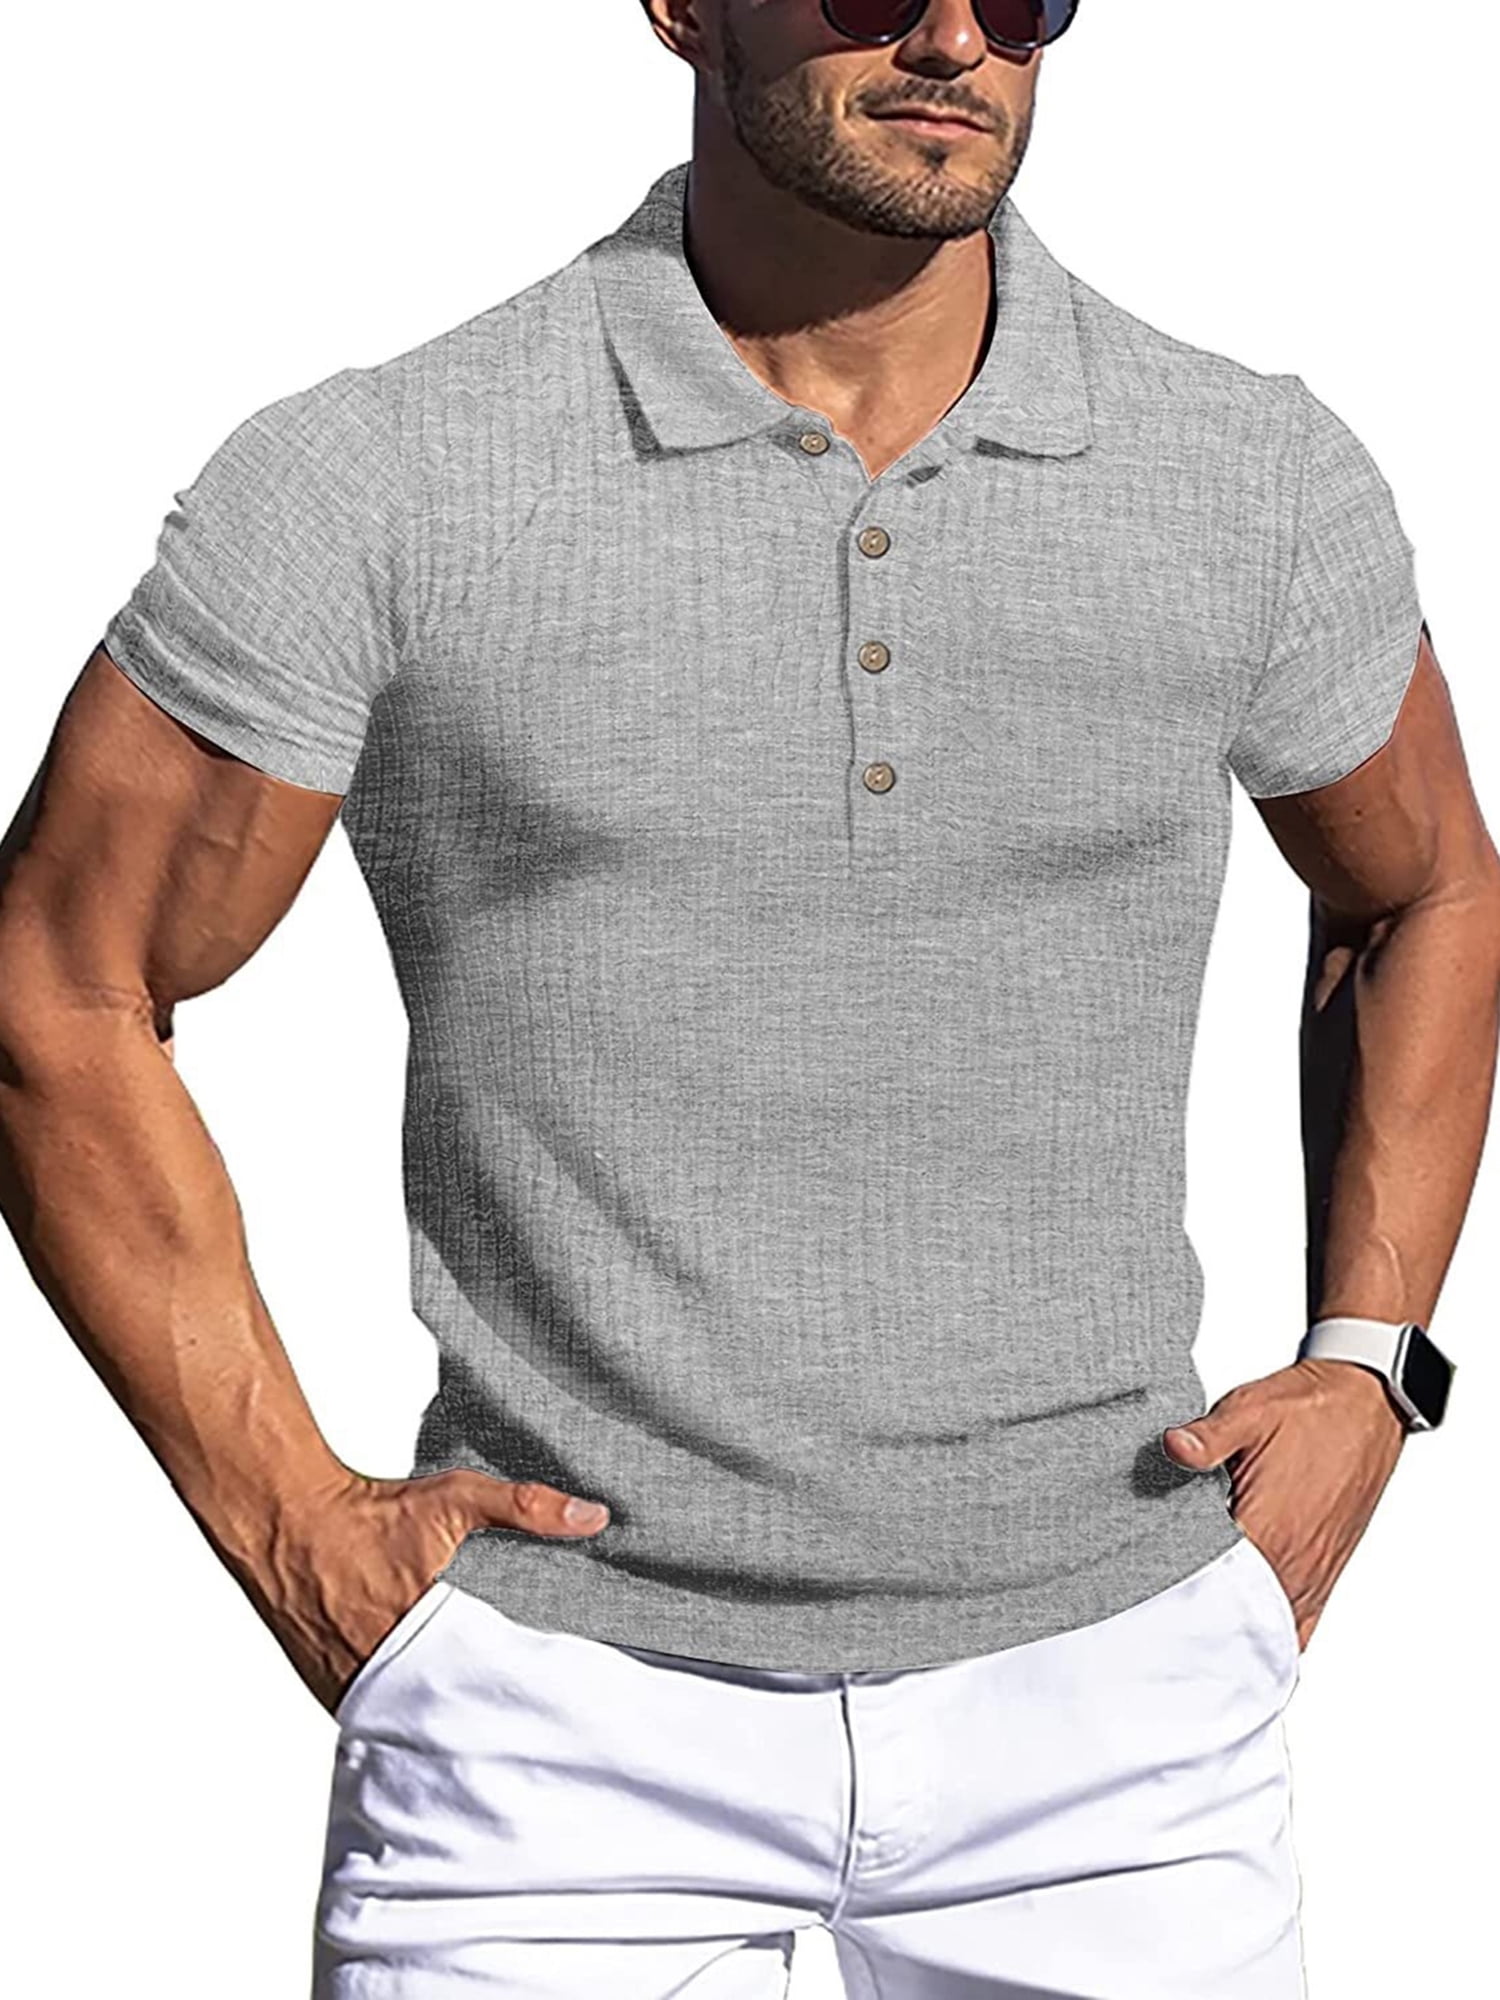 Muscle Fit Golf Shirts | museosdelima.com